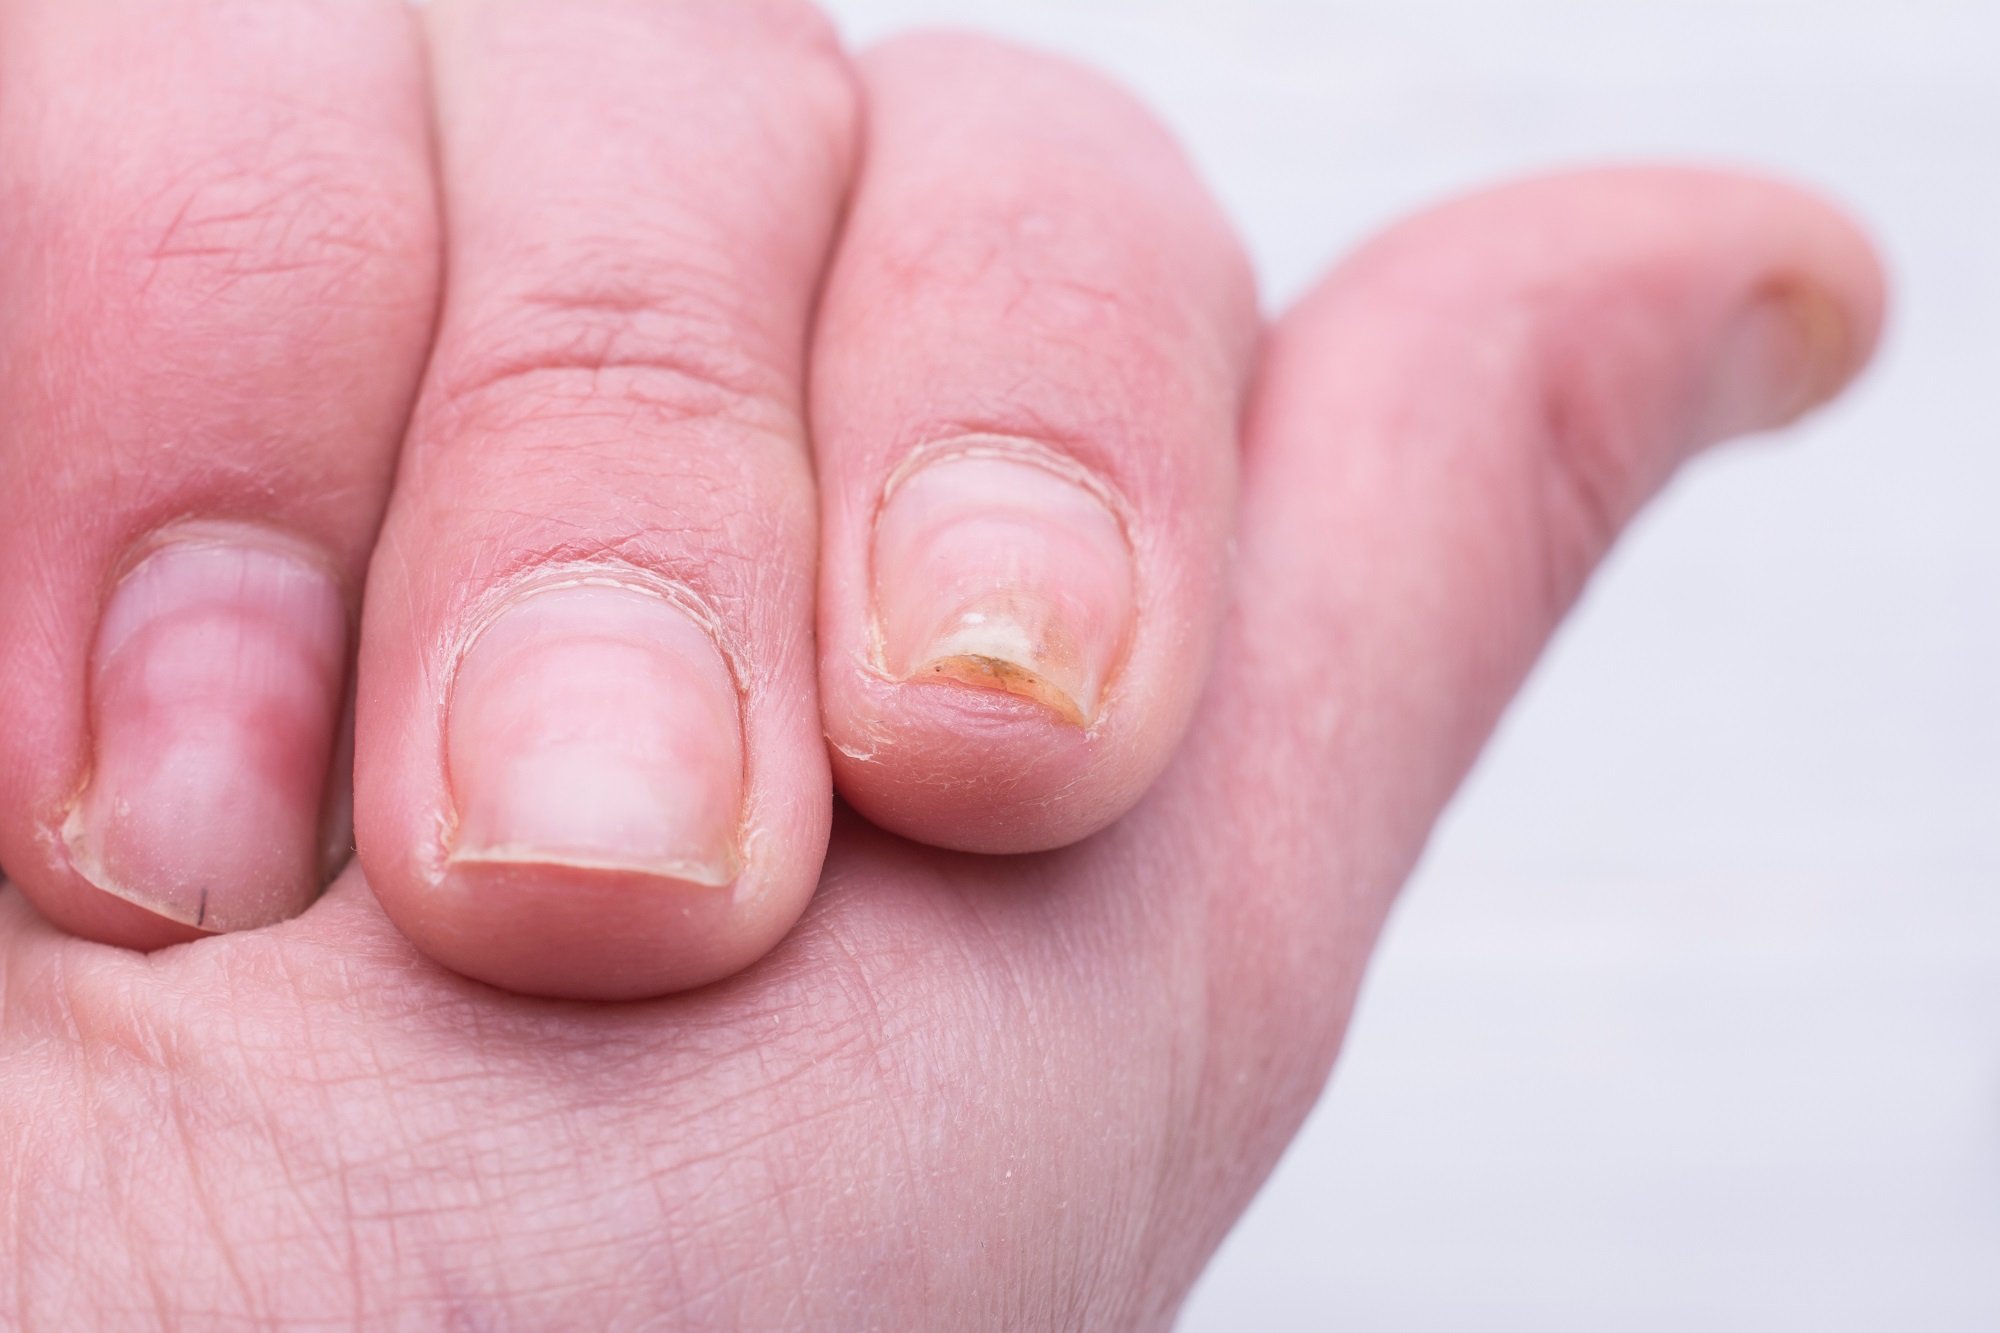 Psoriatic Nail Dystrophy Associated With Erosive Damage at ...